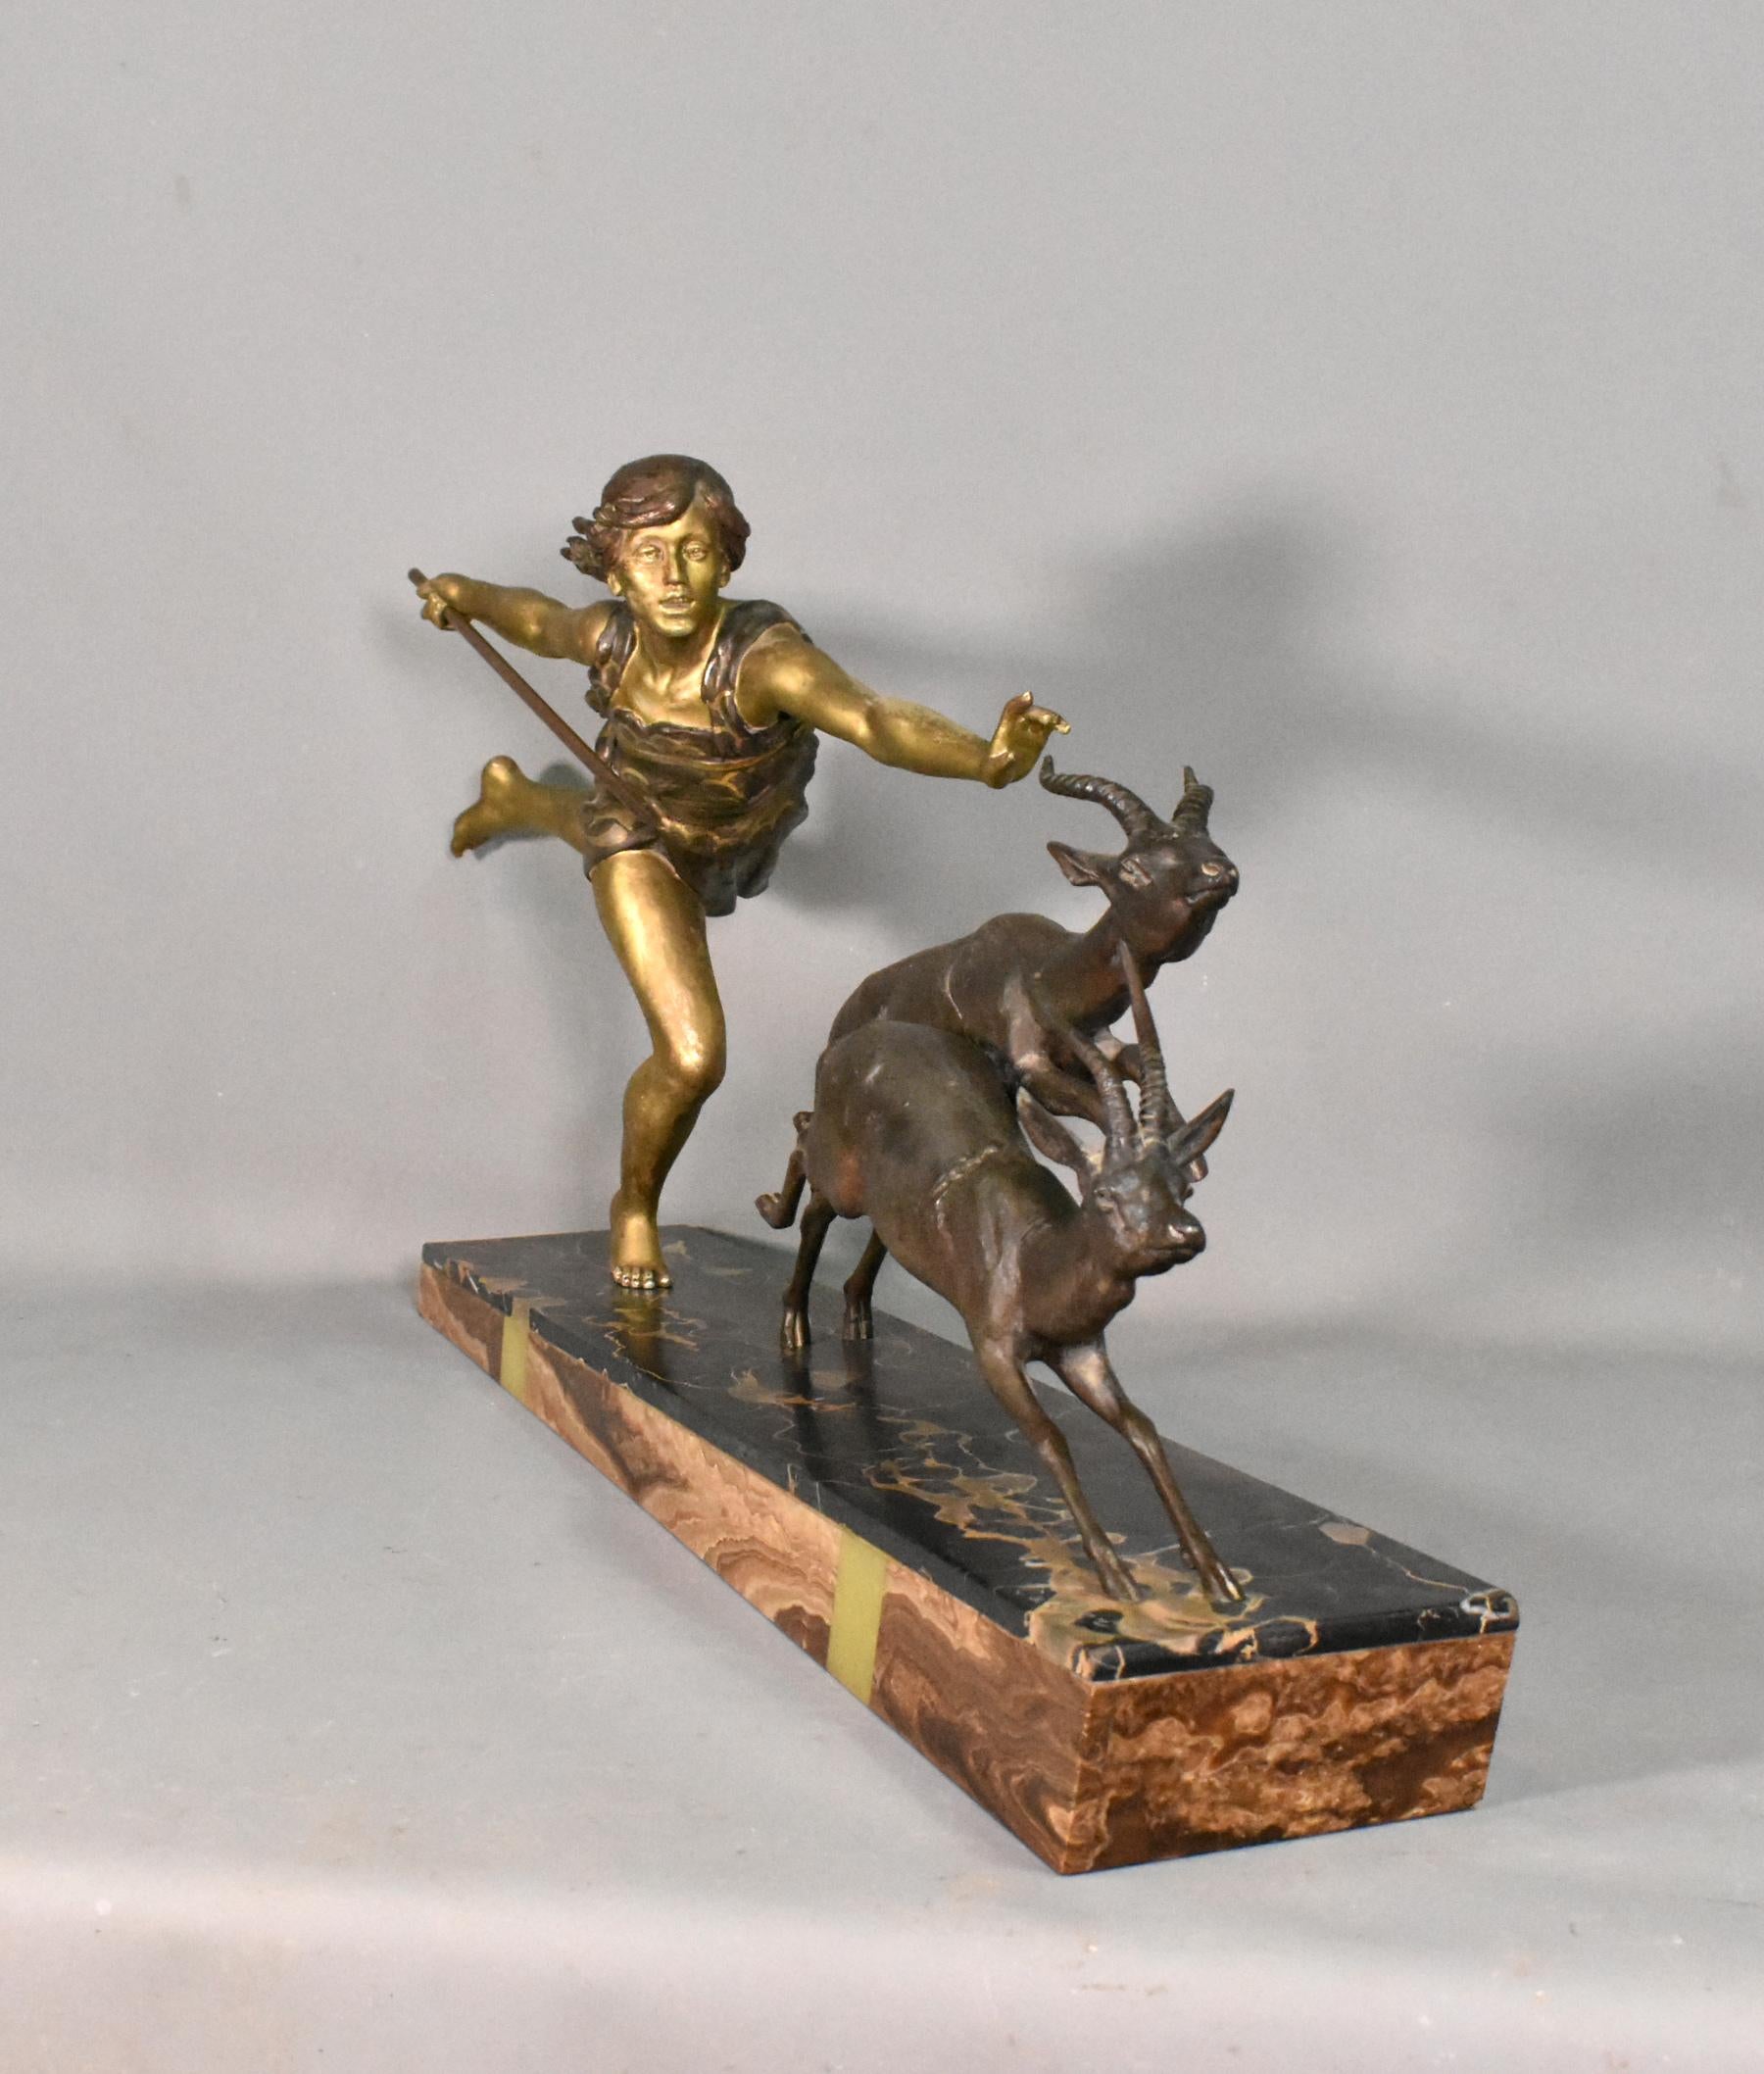 Large Art Deco Sculpture Diana the Huntress by Carlier 1